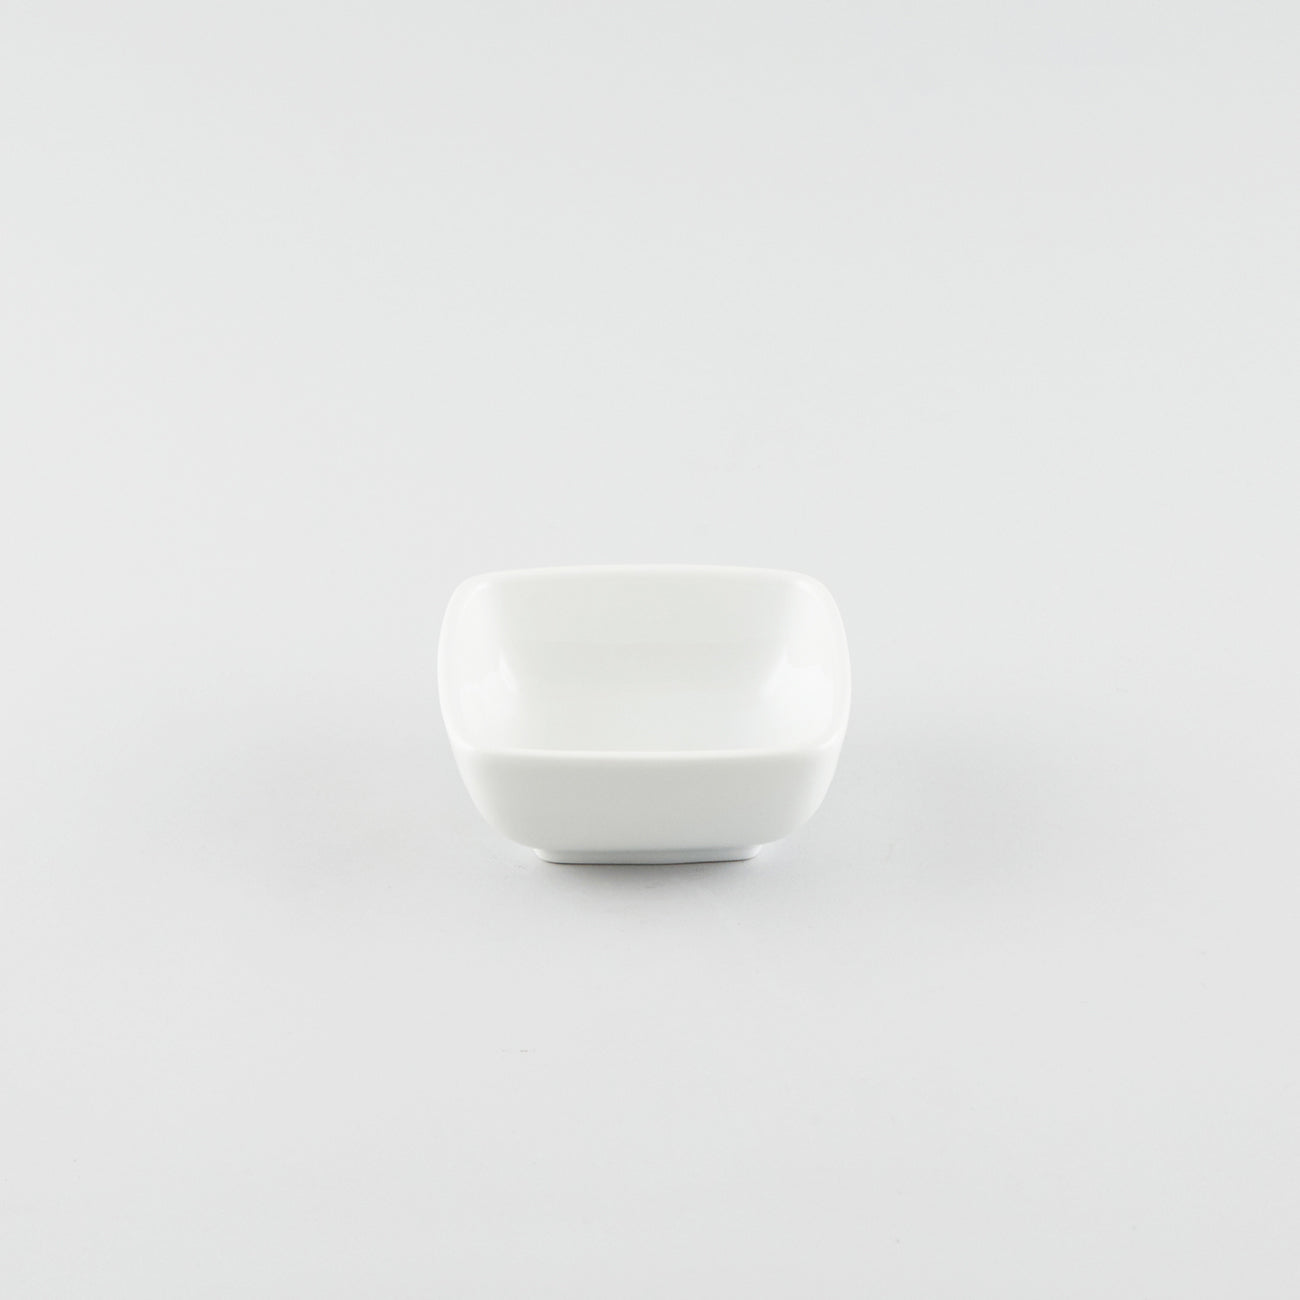 Rounded Square Bowl - White (M)